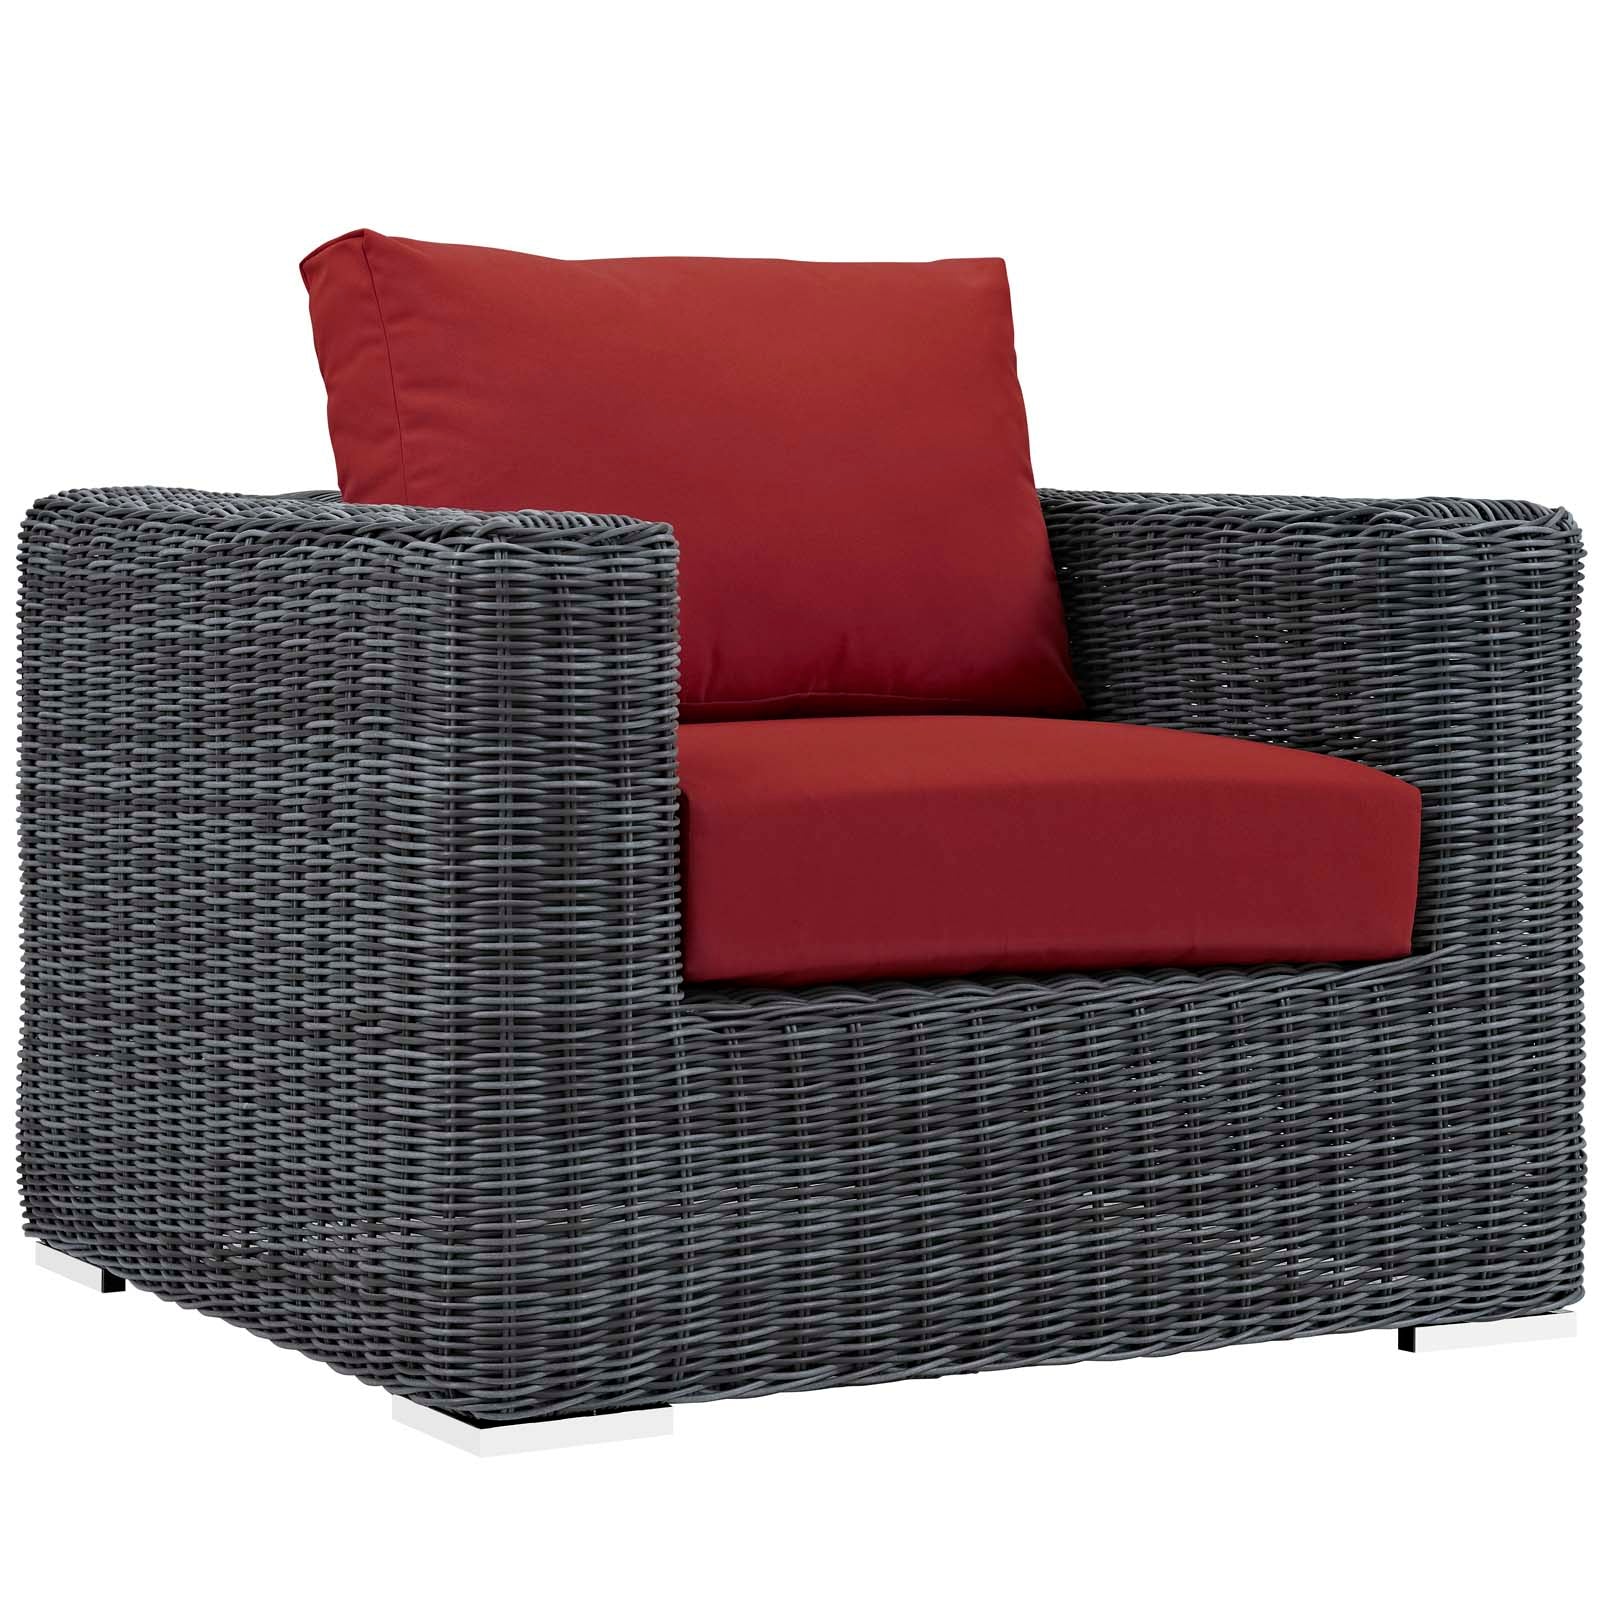 Modway Outdoor Conversation Sets - Summon 5 Piece Outdoor Patio Sectional Set Canvas Red